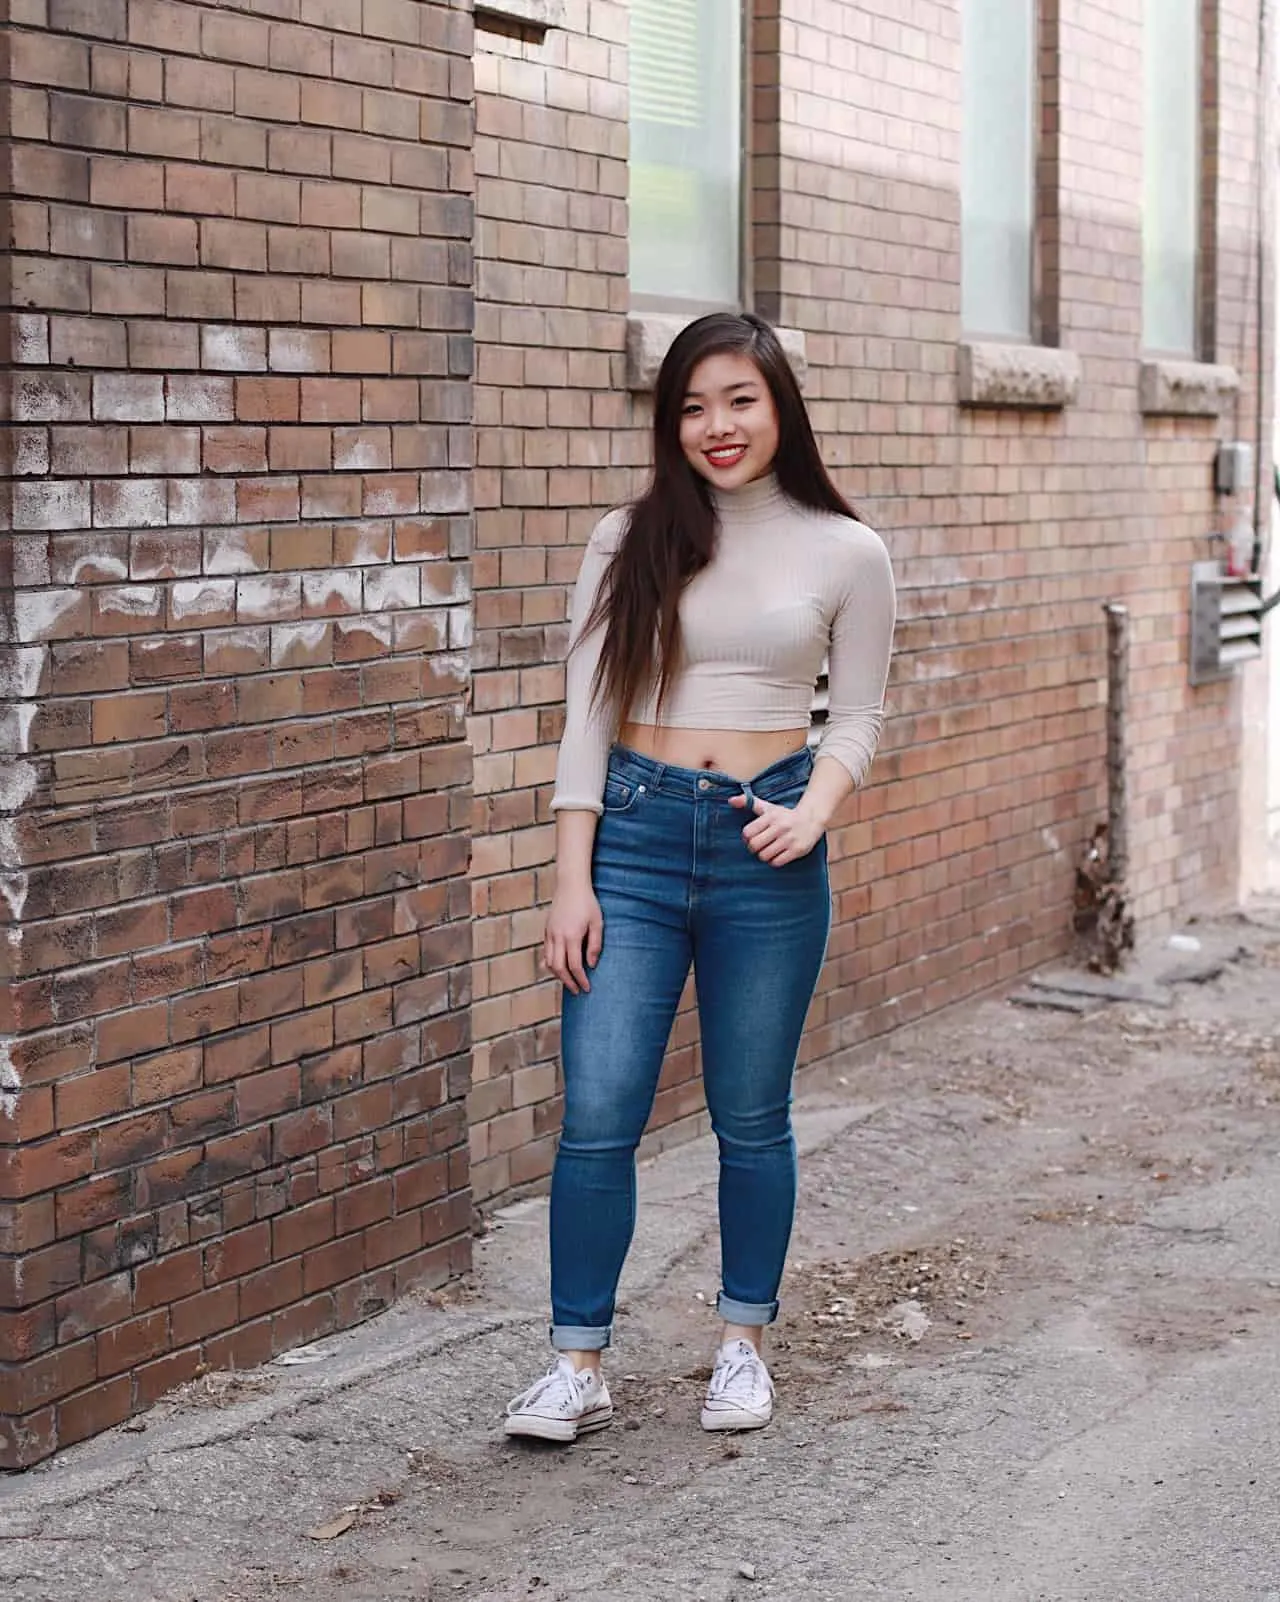 Best jeans for petites | top denim for petite women | how to style high waist jeans for spring | high waisted denim outfit ideas | ivory cropped turtleneck with military green bomber jacket, blue high-waisted denim, and white converse | Diary of a Toronto Girl, a Canadian lifestyle blog